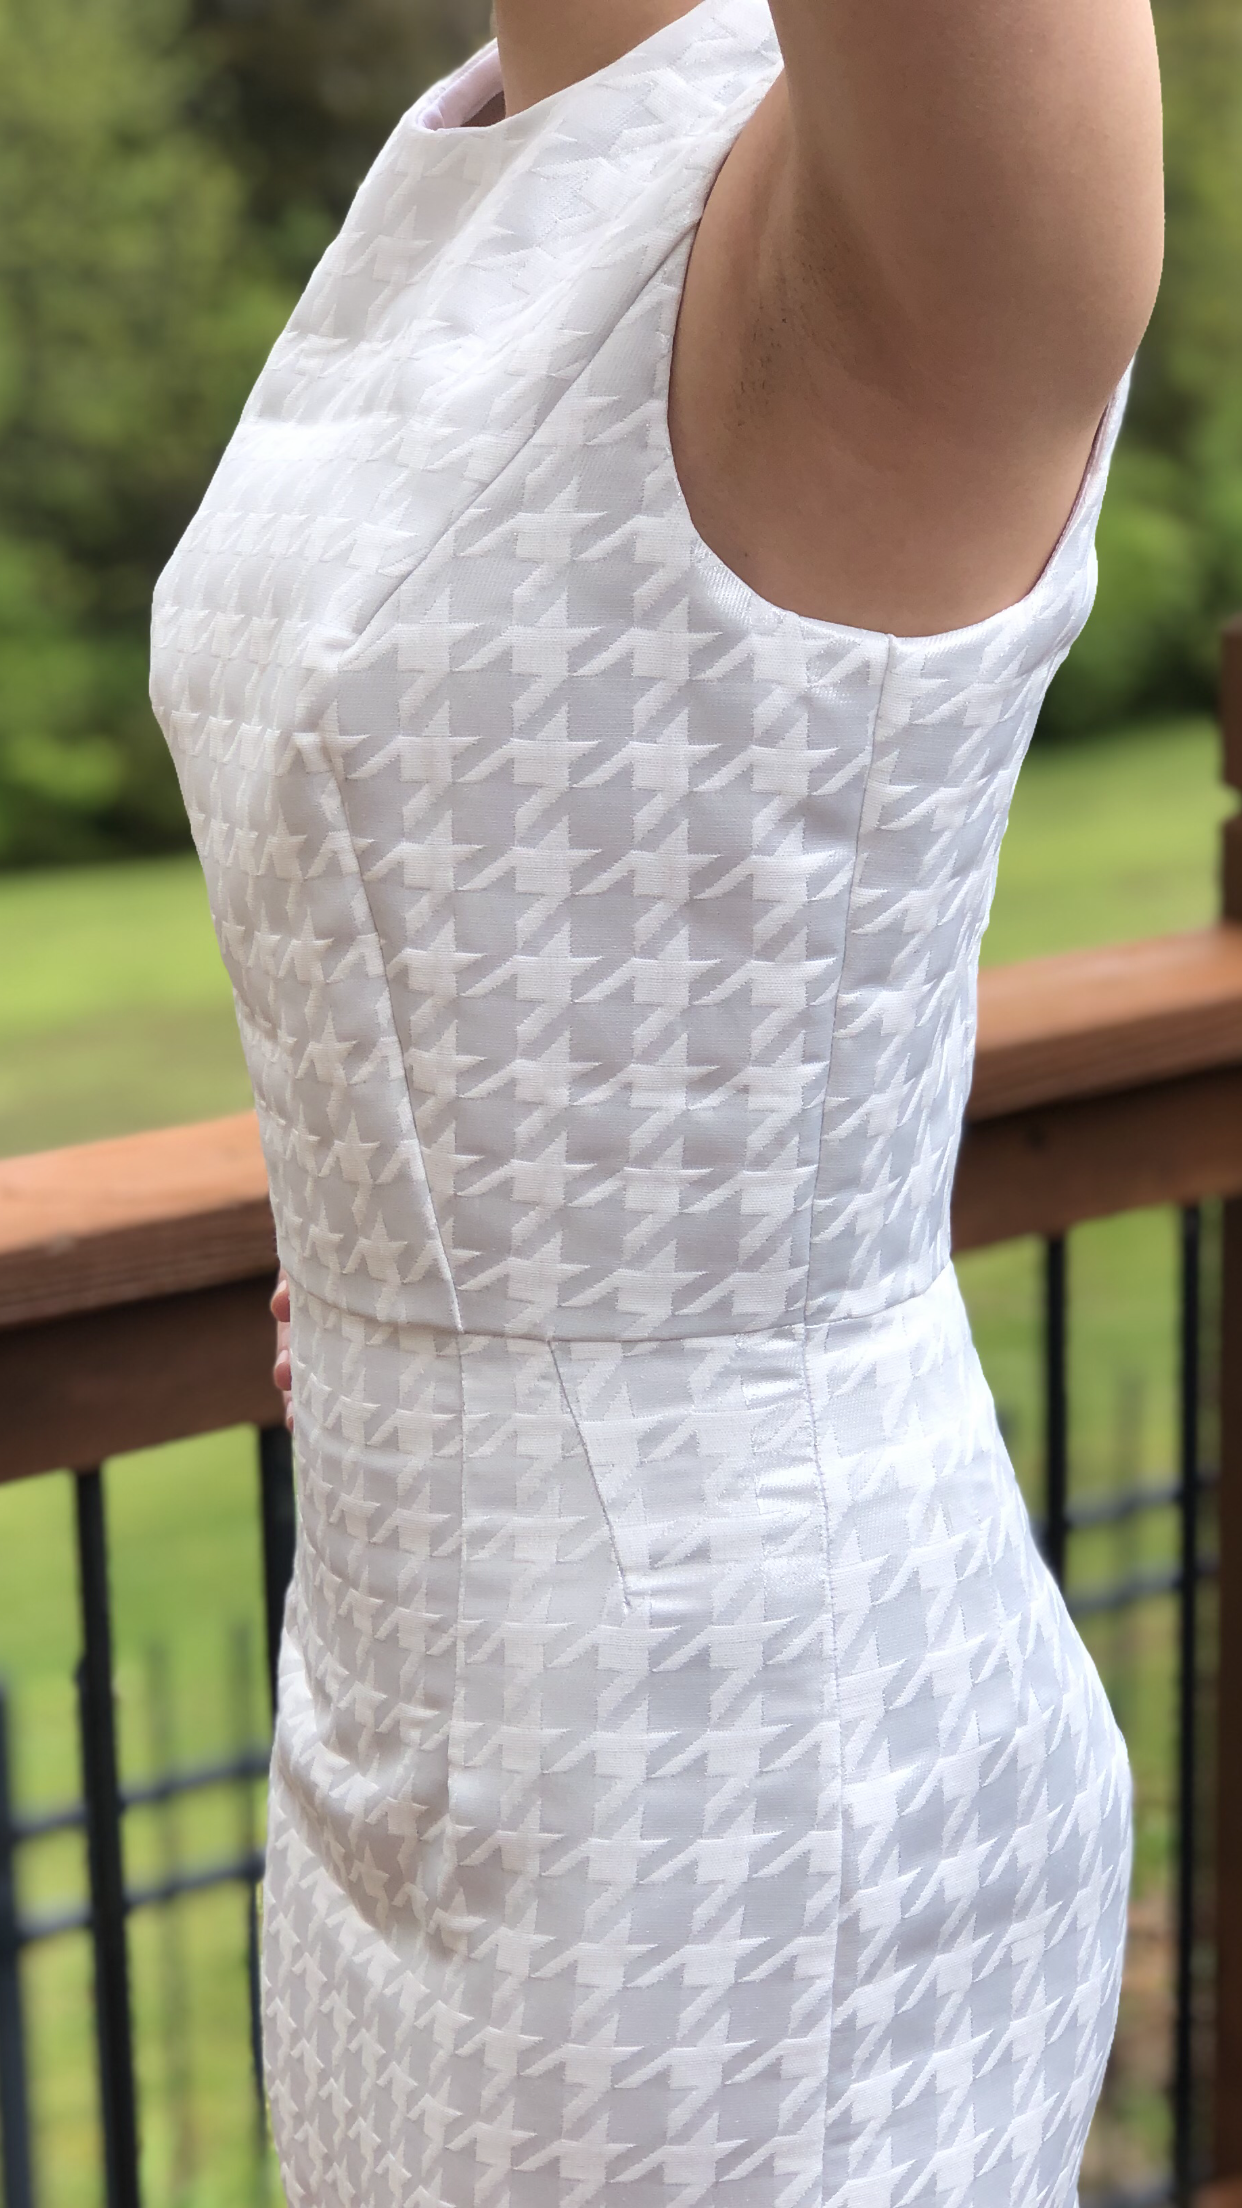 White and Silver Houndstooth Fitted Women’s or Teens Dress with Zipper Closure - Size 6 - Only ONE Available